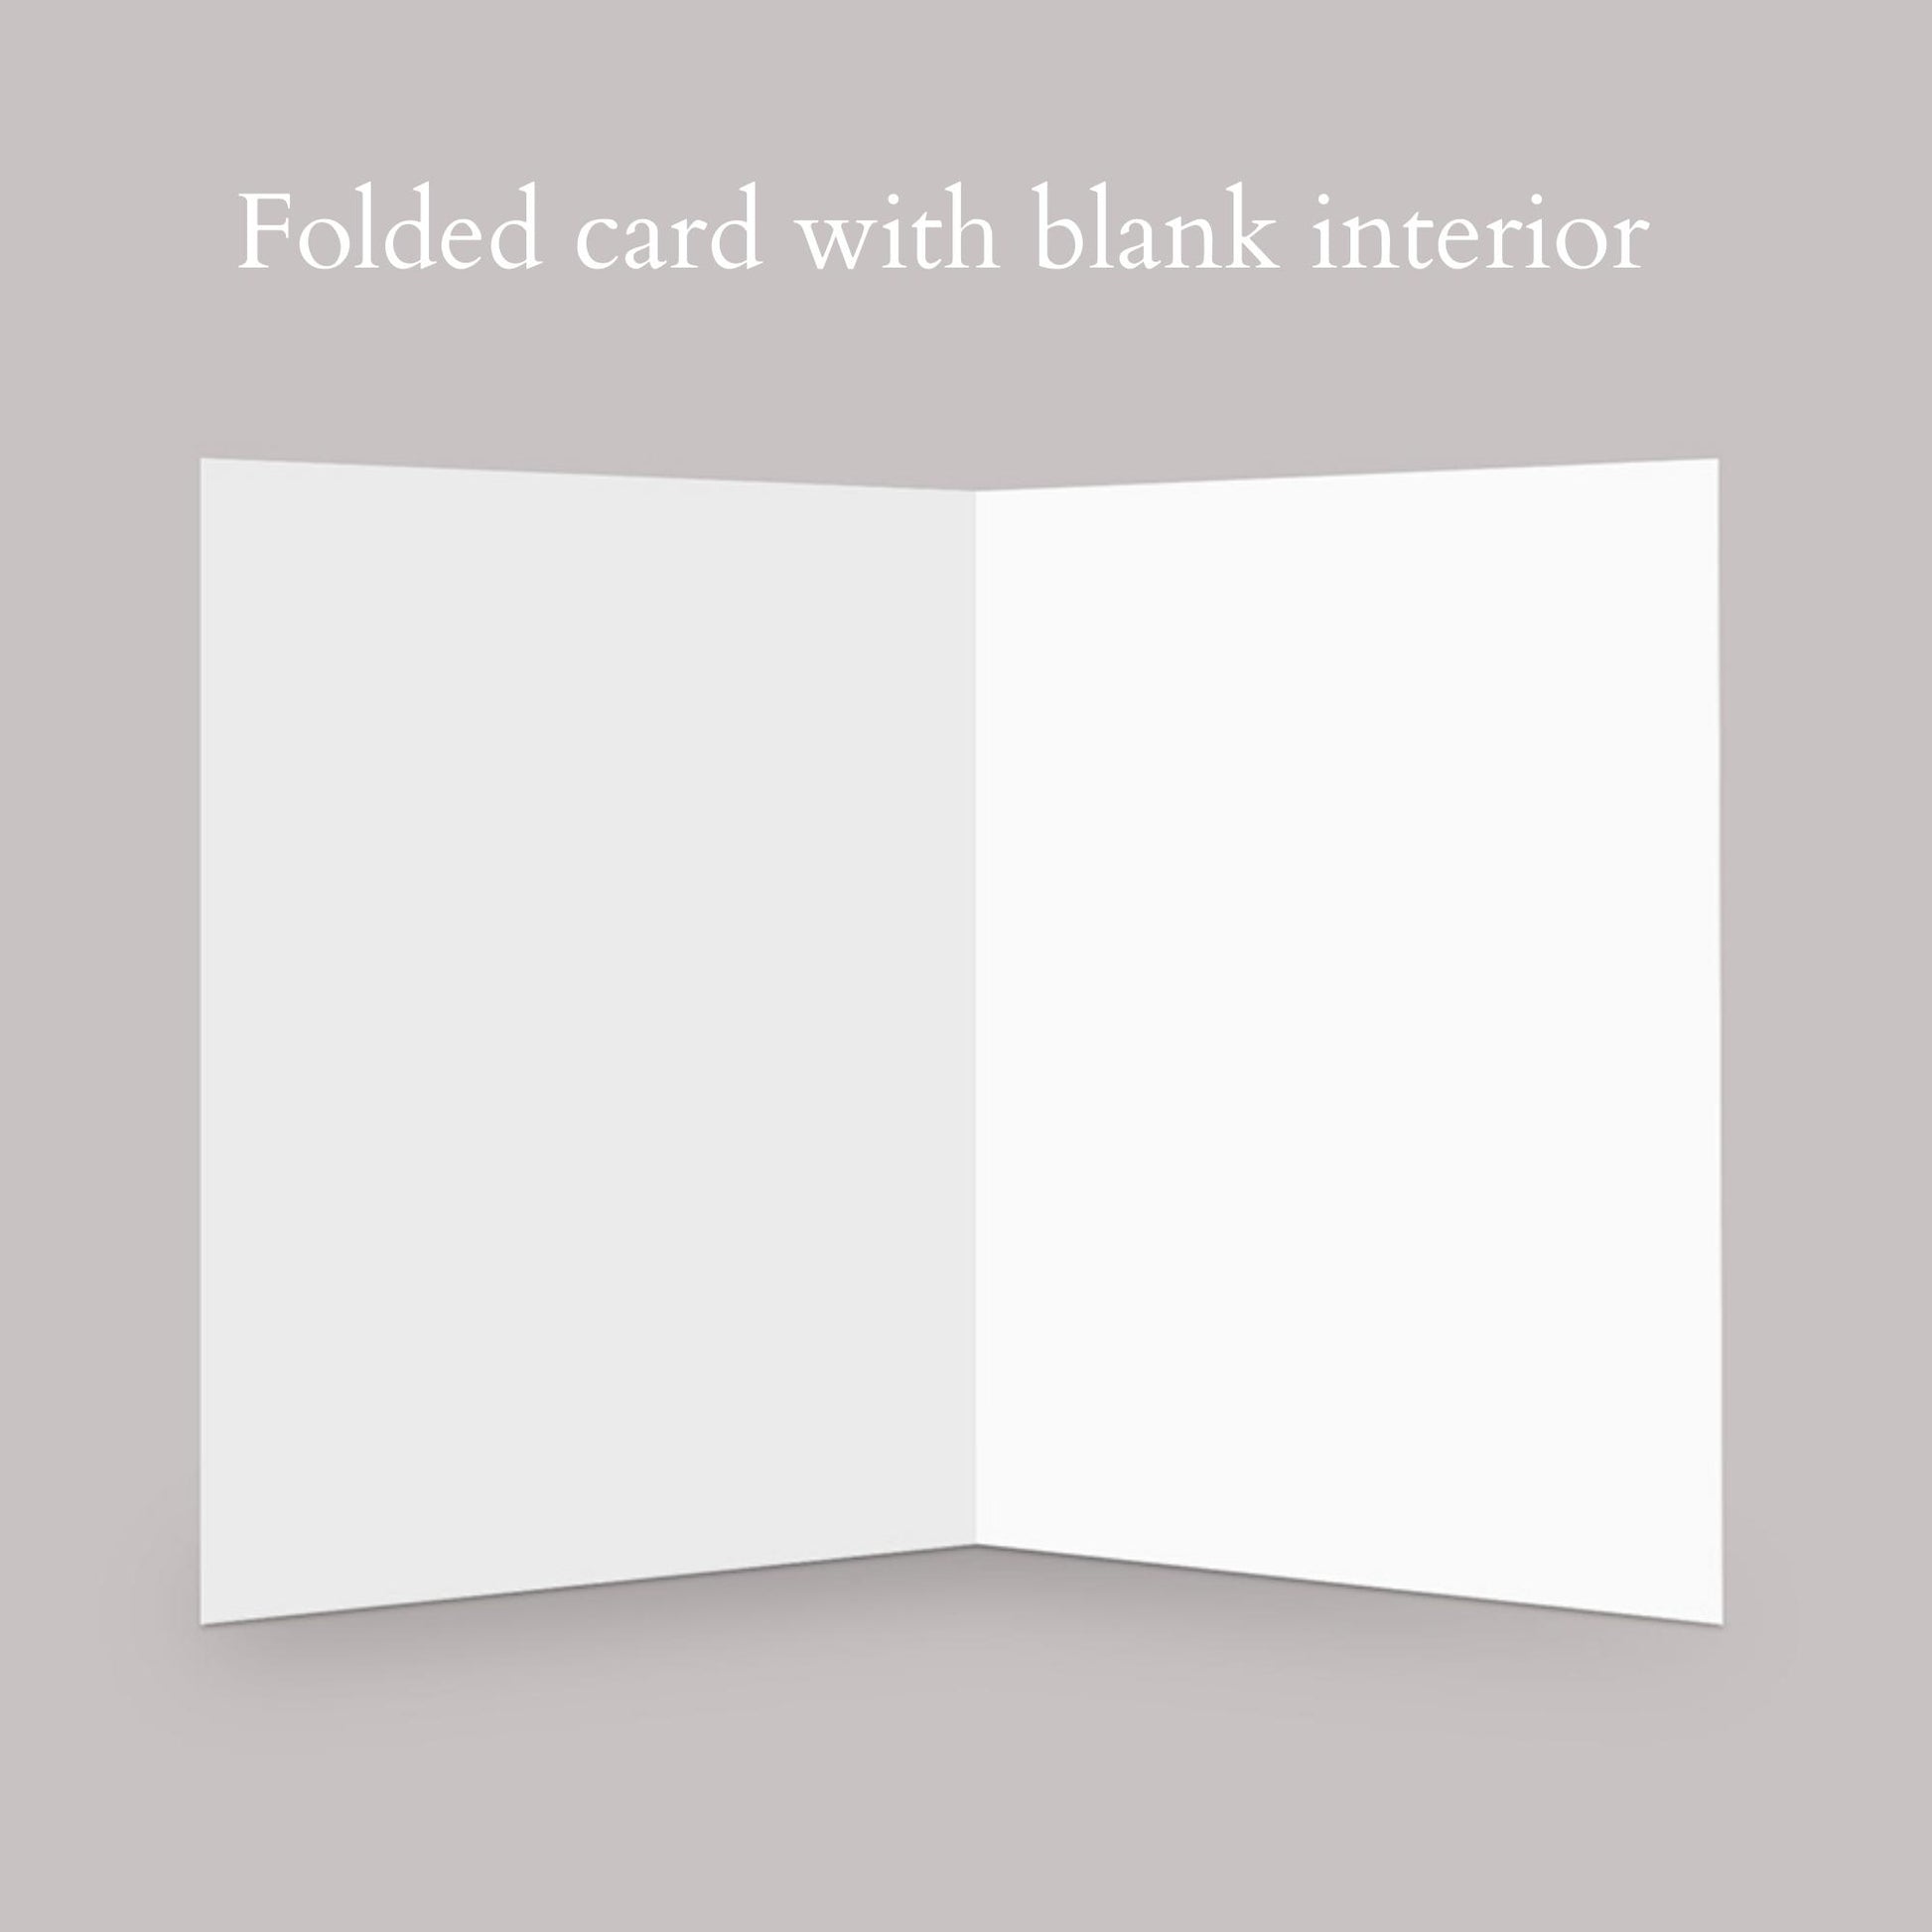 all cards come with a blank interior